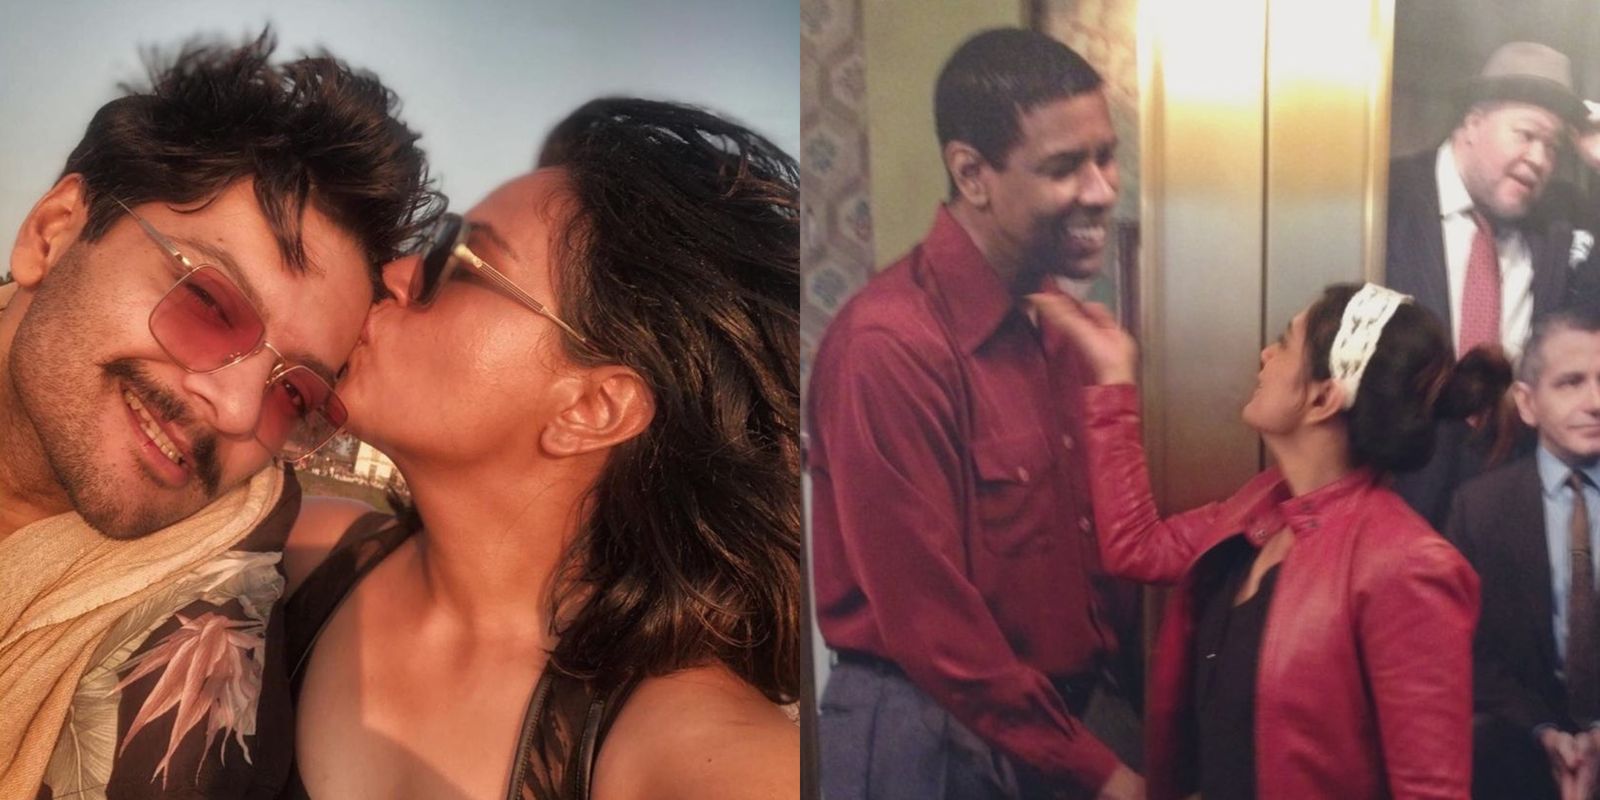 Ali Fazal Has A Problem With Hollywood Star Denzel Washington, Shares Richa Chadha's Candid Photo With Him To Reveal Why